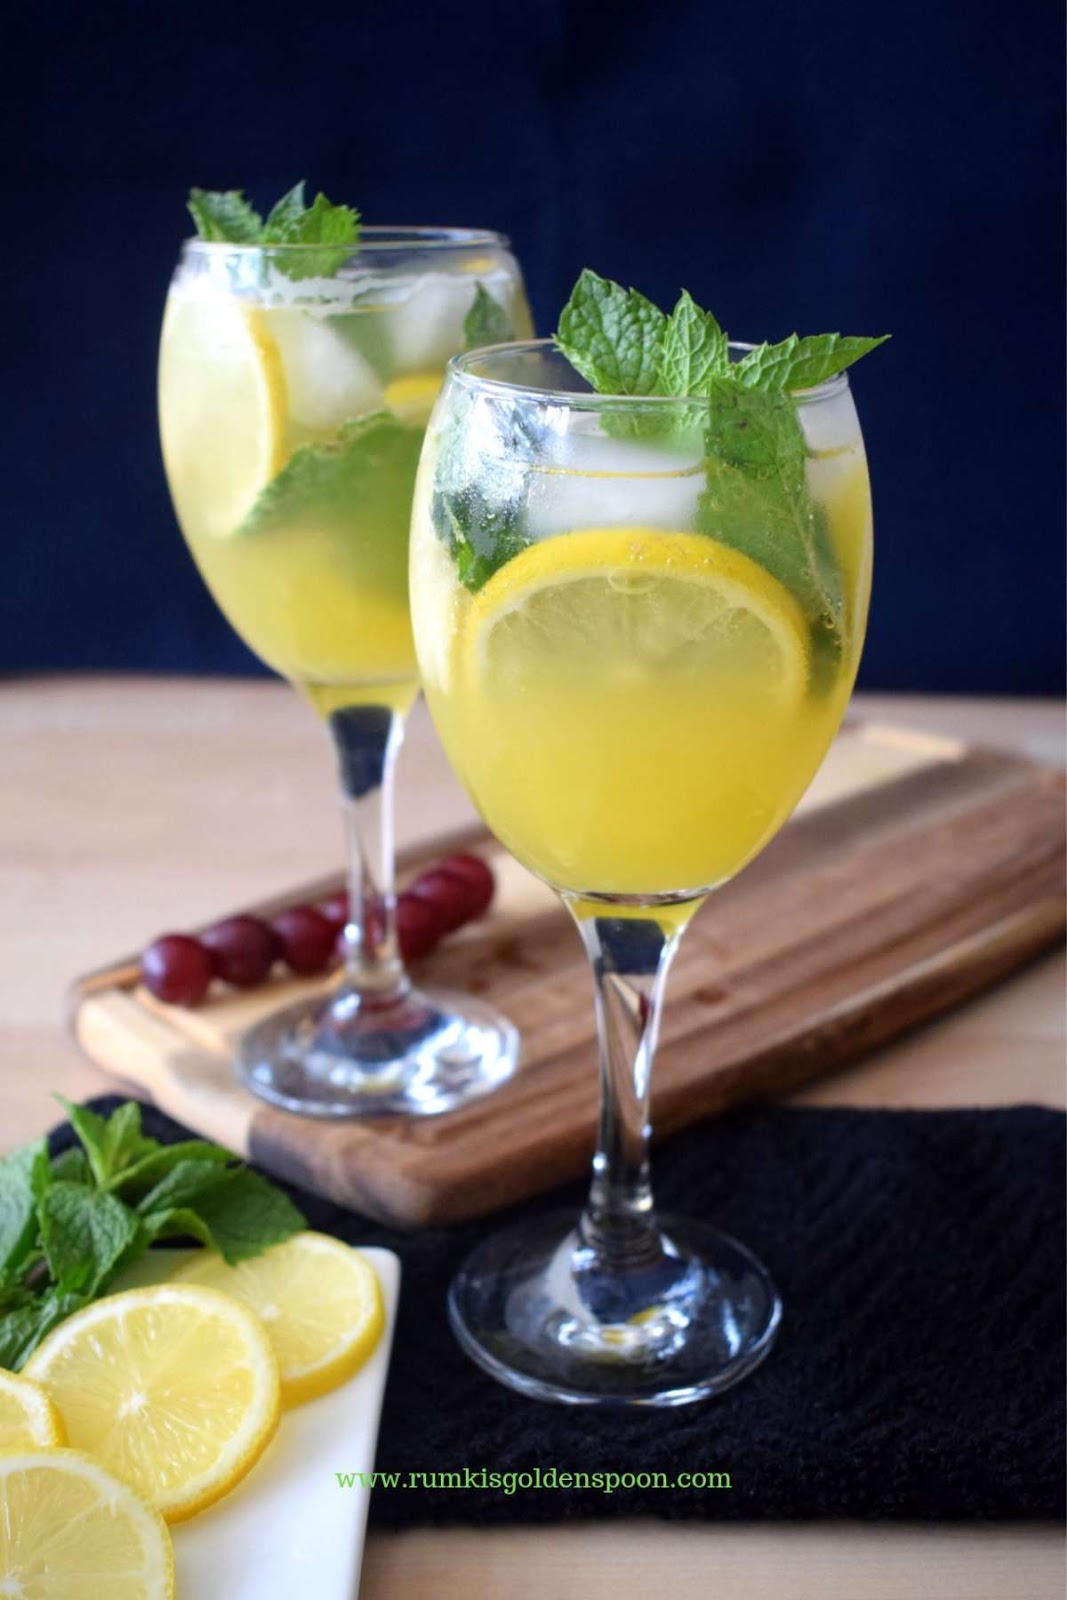 Quick and Easy, The Perfect Pineapple Mojito | Non-Alcoholic | Mocktail , Rumki's Golden Spoon, Beverage recipes, drink recipes with pineapple, mojito recipes with pineapple. Mocktail recipes with pineapple juice or tropical fruit or fruit juice, mojito recipe with pineapple, fruit punch, beverage recipes with soda/ lemonade, fresh pineapple drinks non-alcoholic, pineapple mocktail, virgin pineapple drink, pineapple drink recipe non-alcoholic, nojito recipes